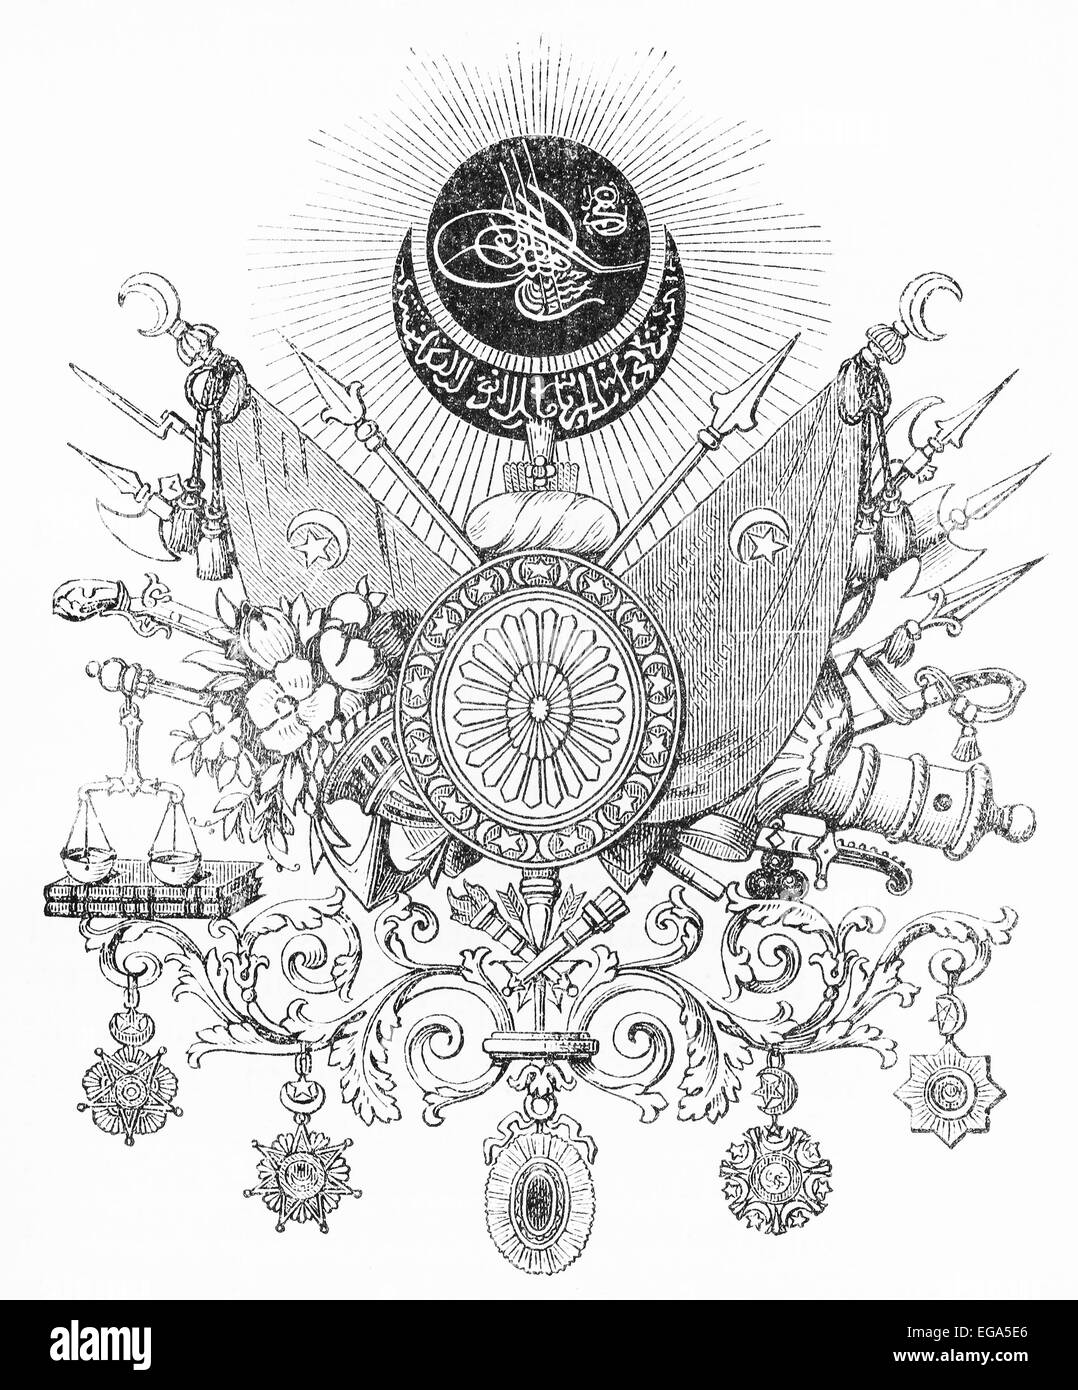 Vintage drawing of Turkish Empire emblem at the end of 19th century Stock Photo